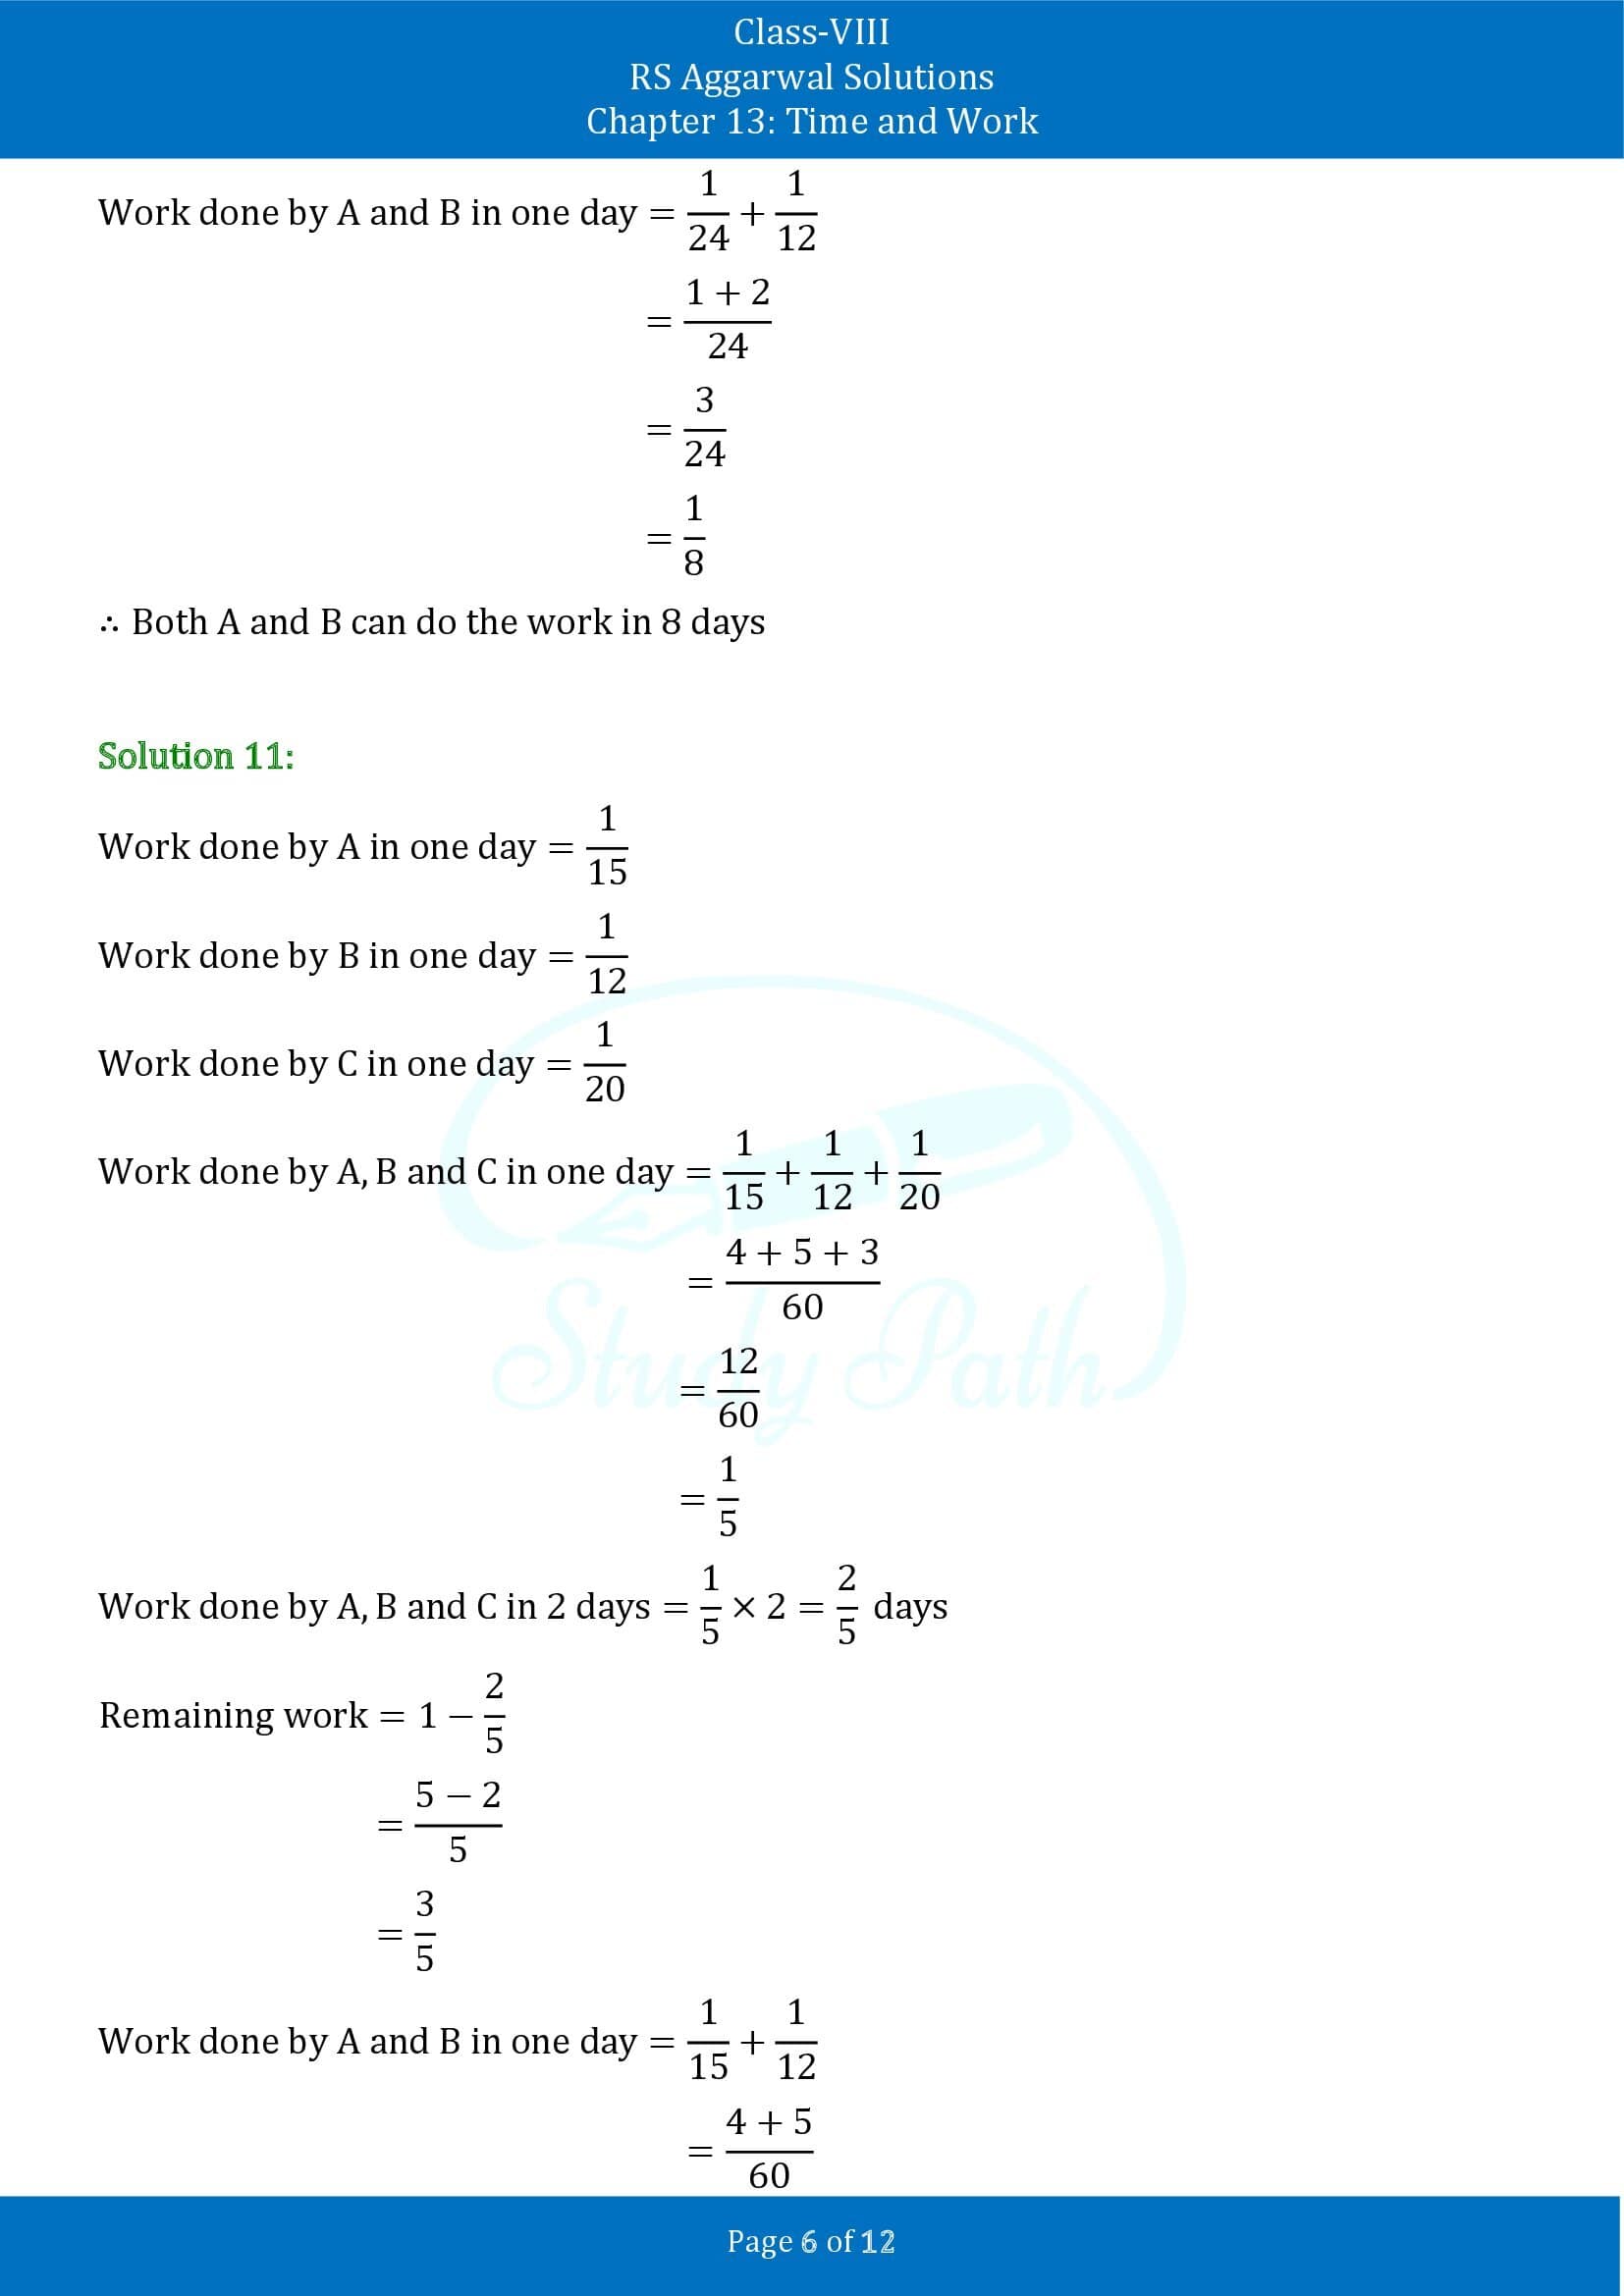 RS Aggarwal Solutions Class 8 Chapter 13 Time and Work Exercise 13A 00006